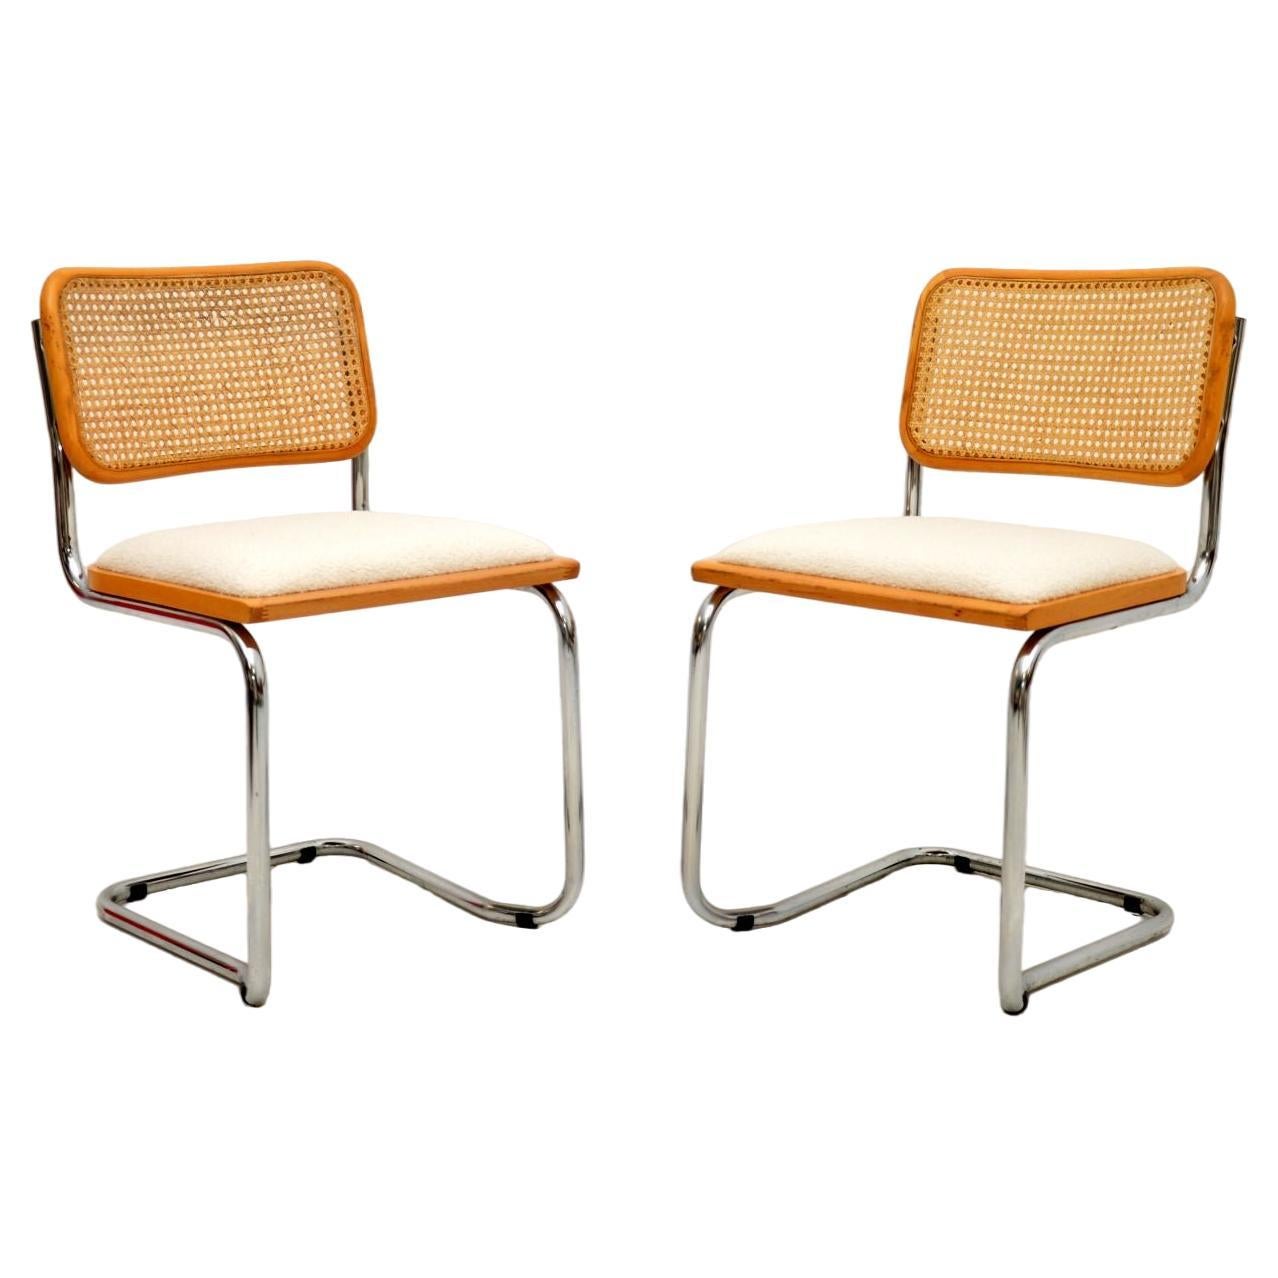 Pair of Vintage Marcel Breuer Cesca Dining Chairs